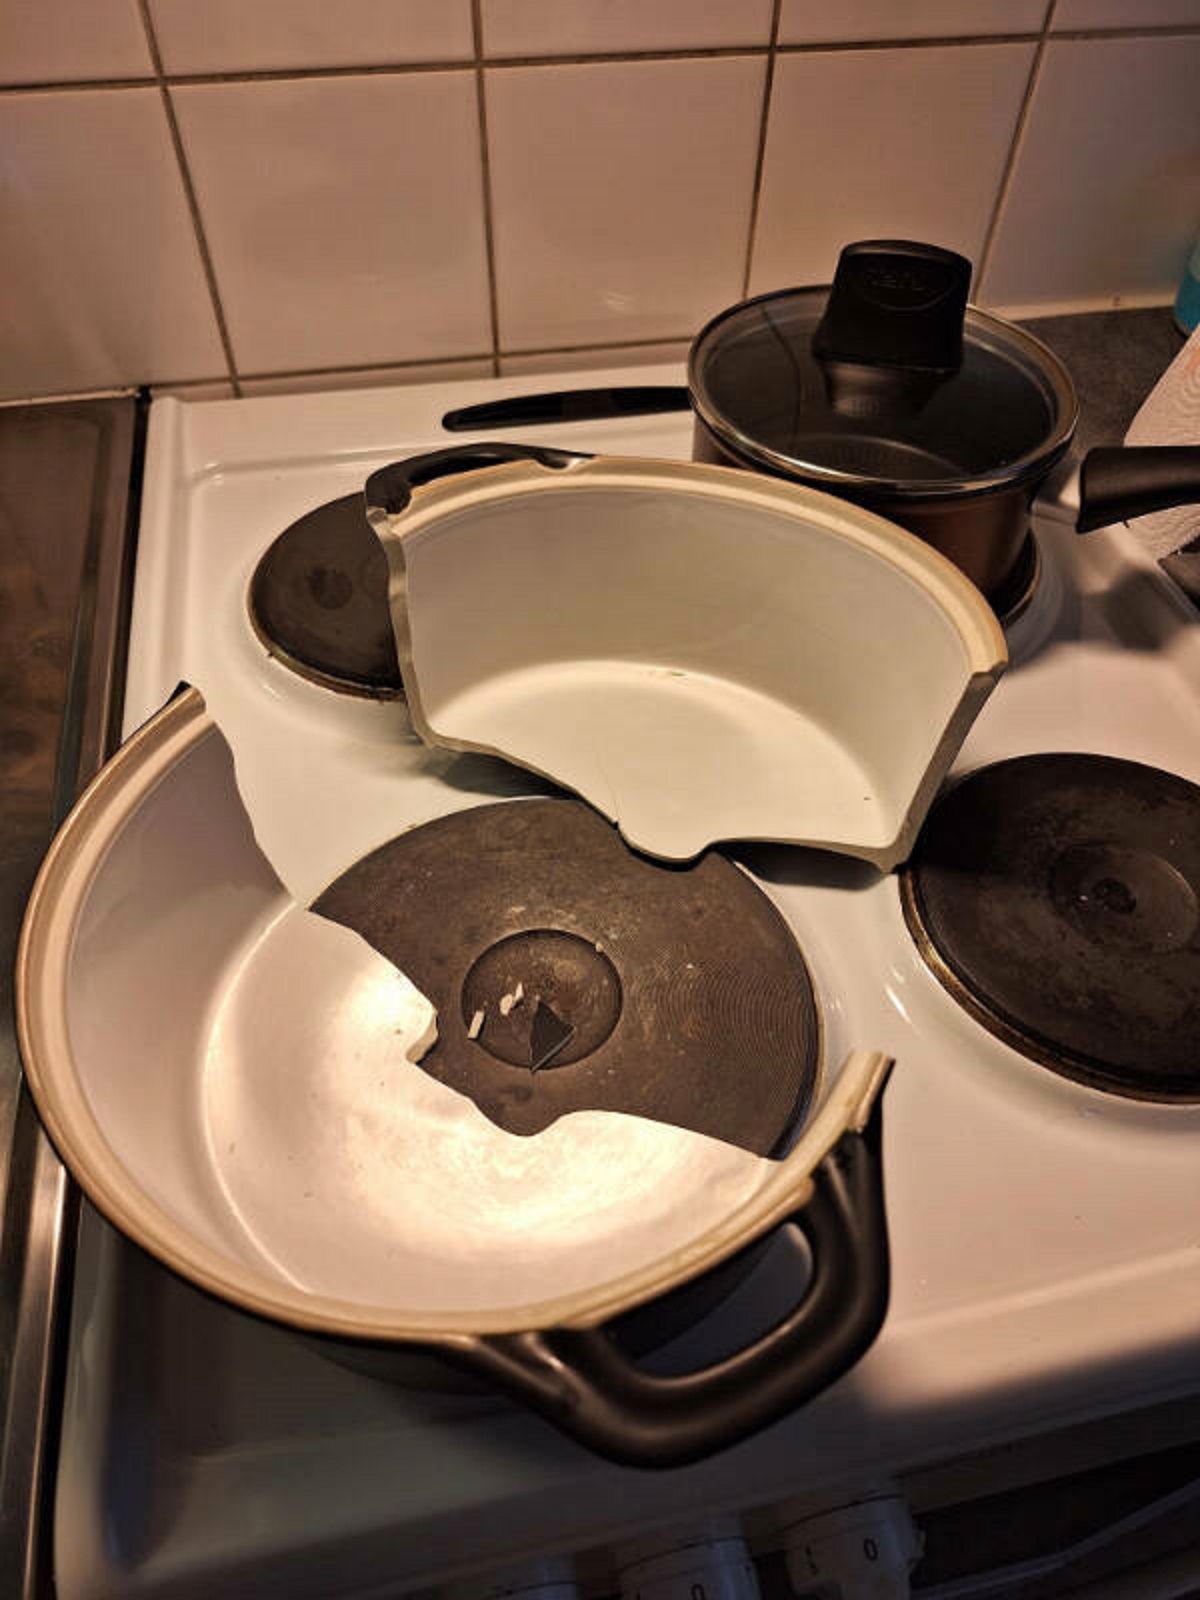 “My favorite pot exploded while warming up.”